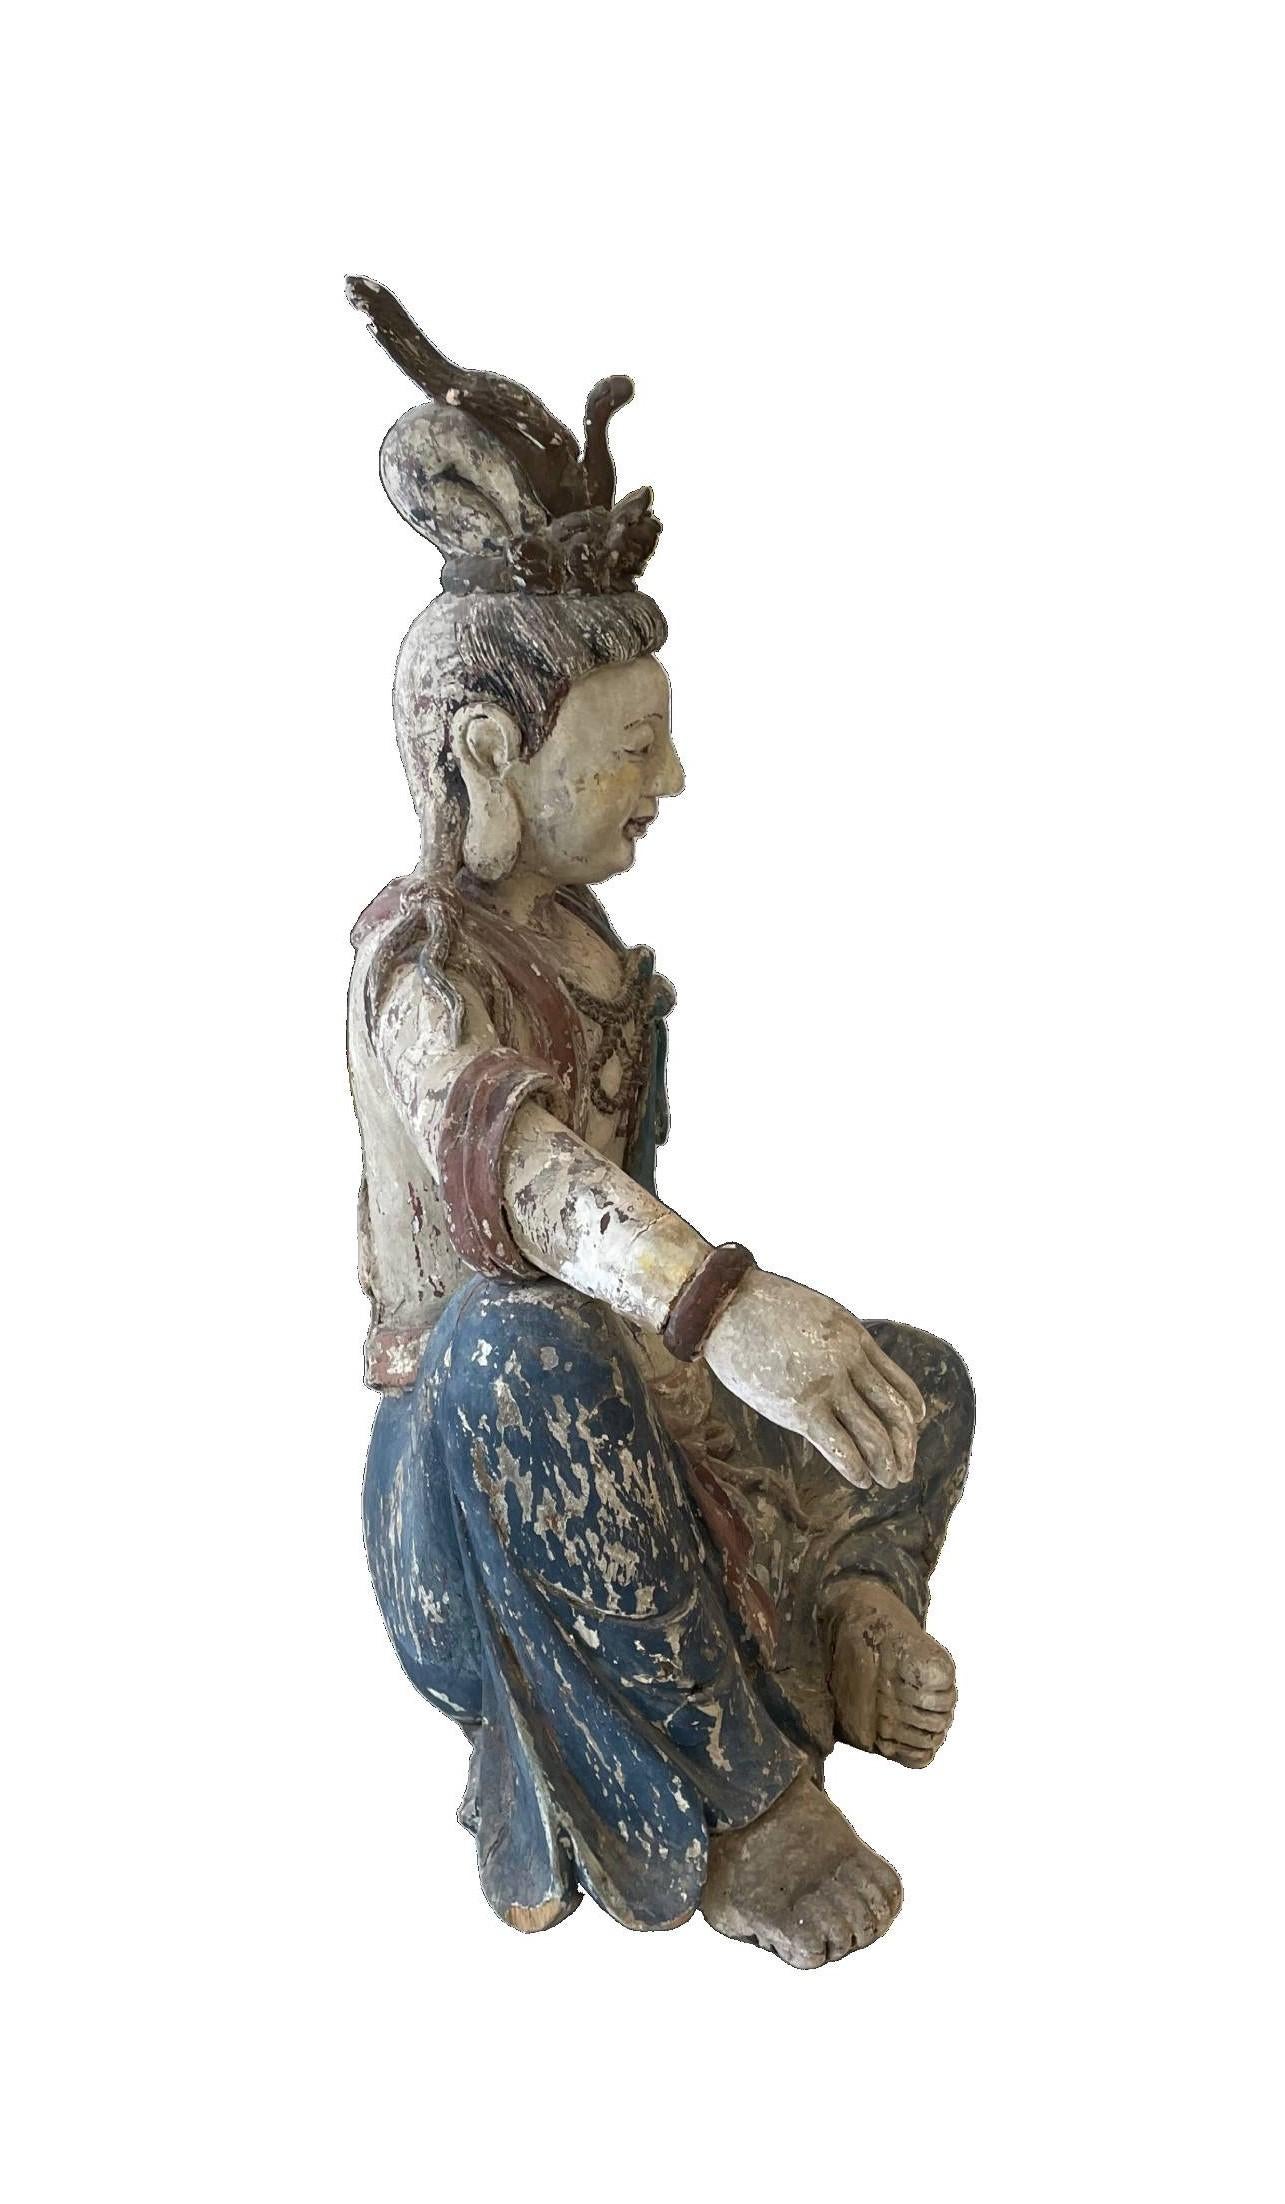 Inspired by the Ming Dynasty, this elegant statue of Guanyin, Goddess of Compassion, was hand carved in the 20th century. The artist captures the timeless and spiritual aura of Guanyin. Her flowing robes and symbolic motifs reflect ancient